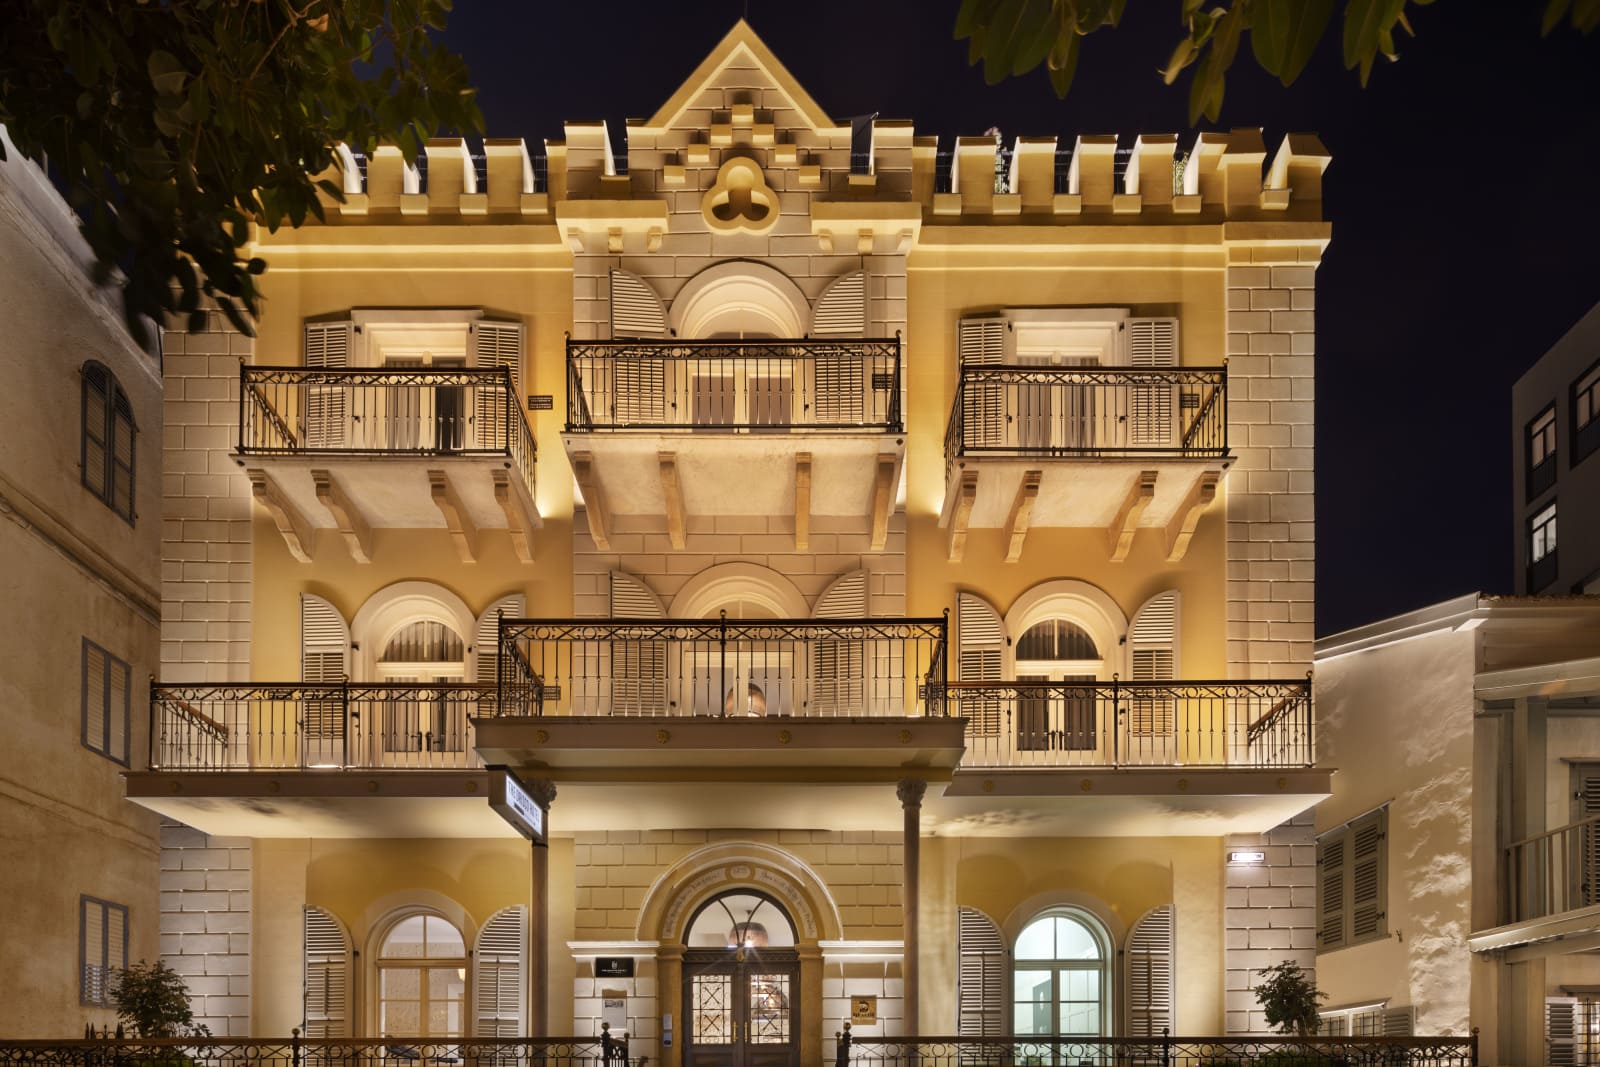 The Drisco Hotel in Jaffa’s American Colony dates back to the 19th century and has housed celebrity guests such as Mark Twain. Photo by Assaf Pinchuk.